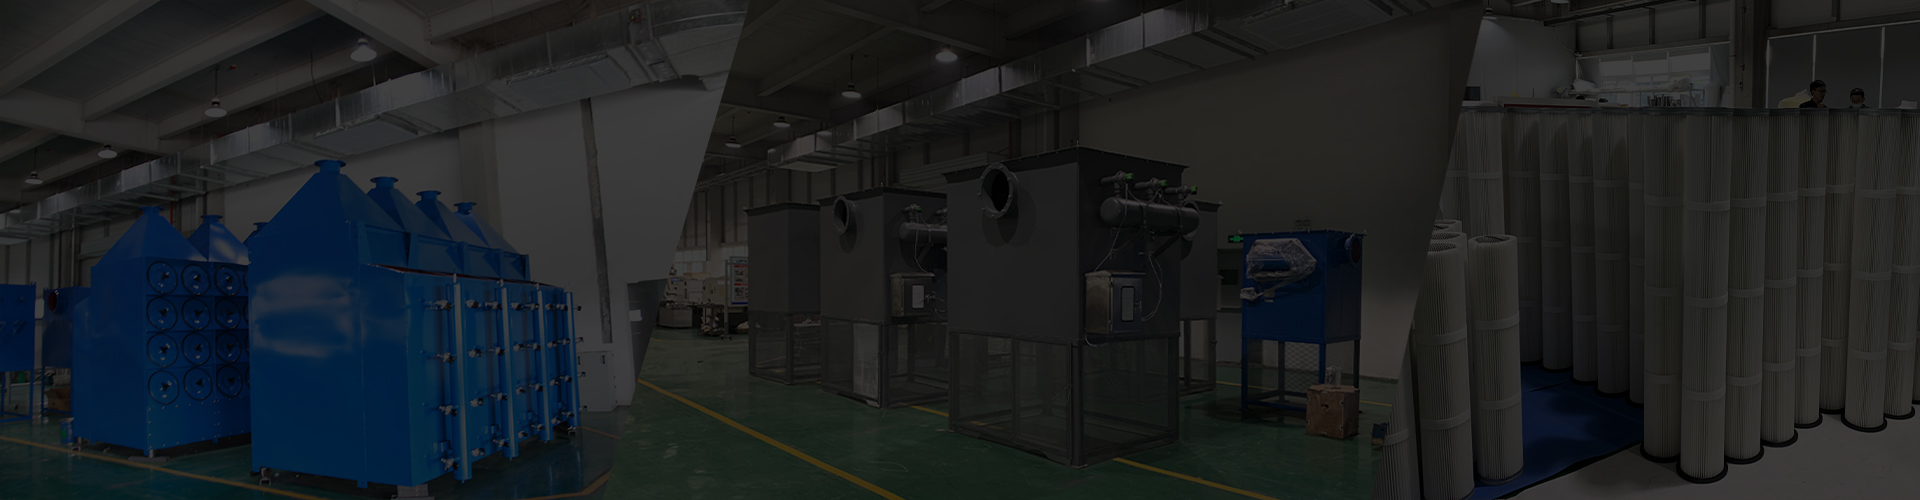 Cartridge dust collector banner